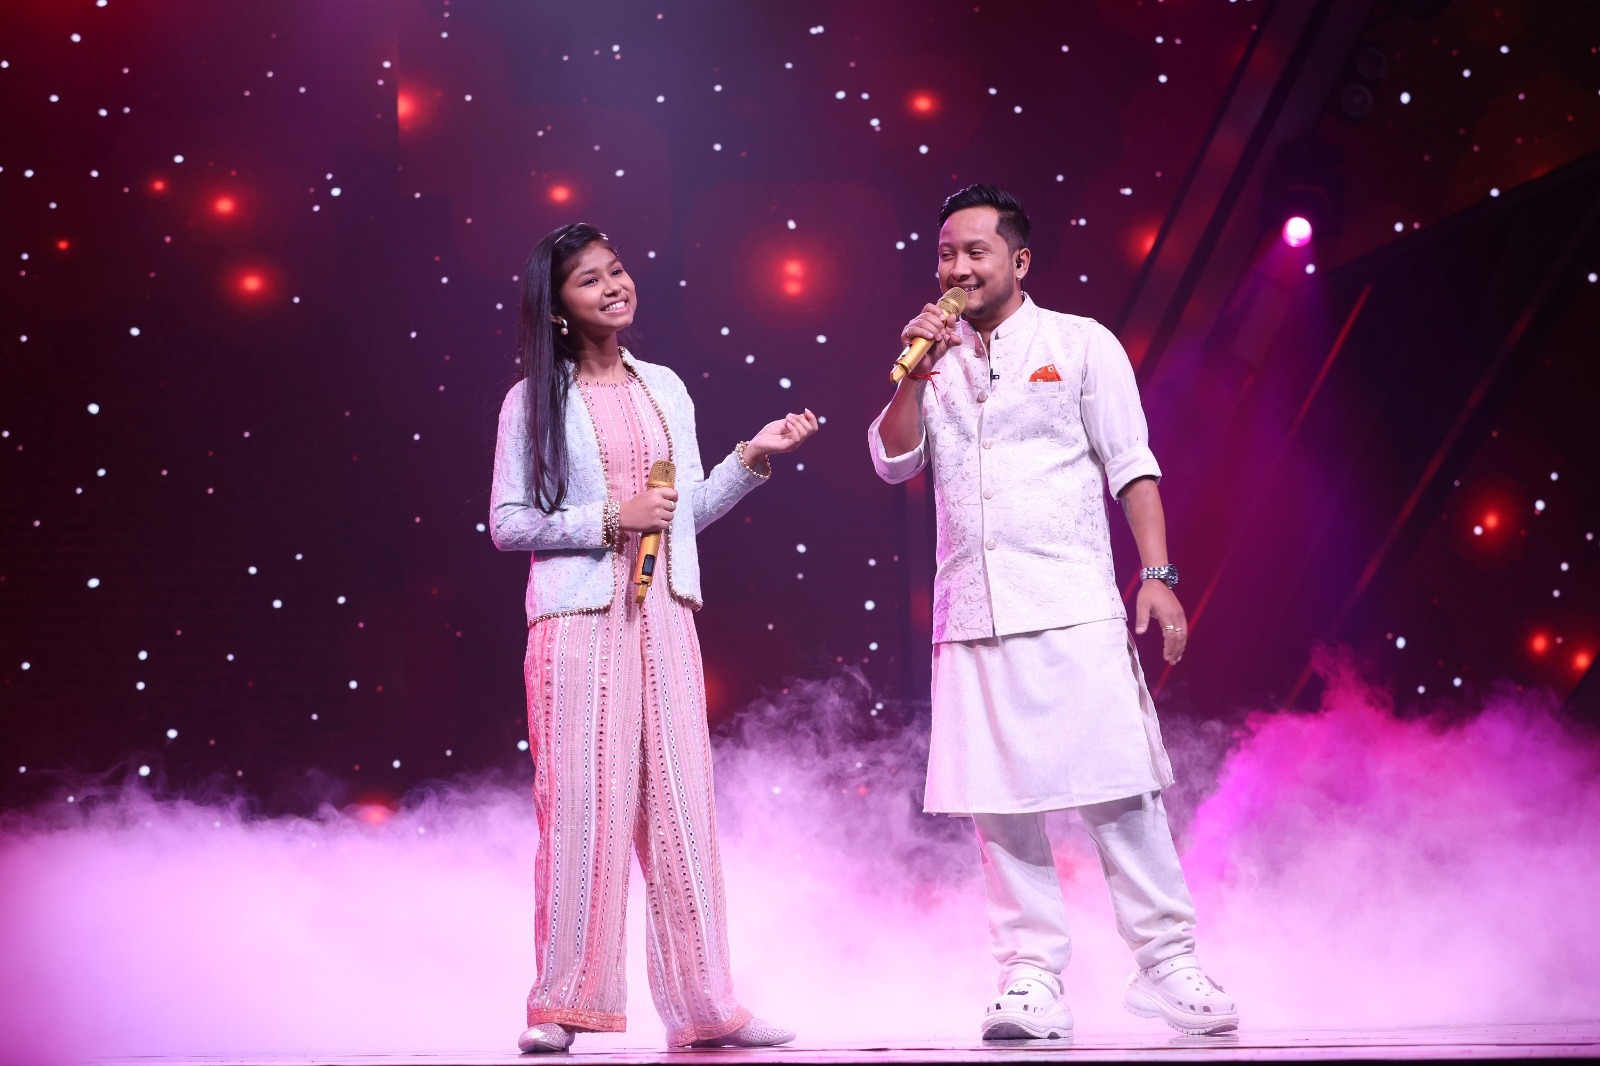 Chandigarh’s Laisel Rai makes her father proud with a beautiful performance in the Superstar Singer 3 auditions.